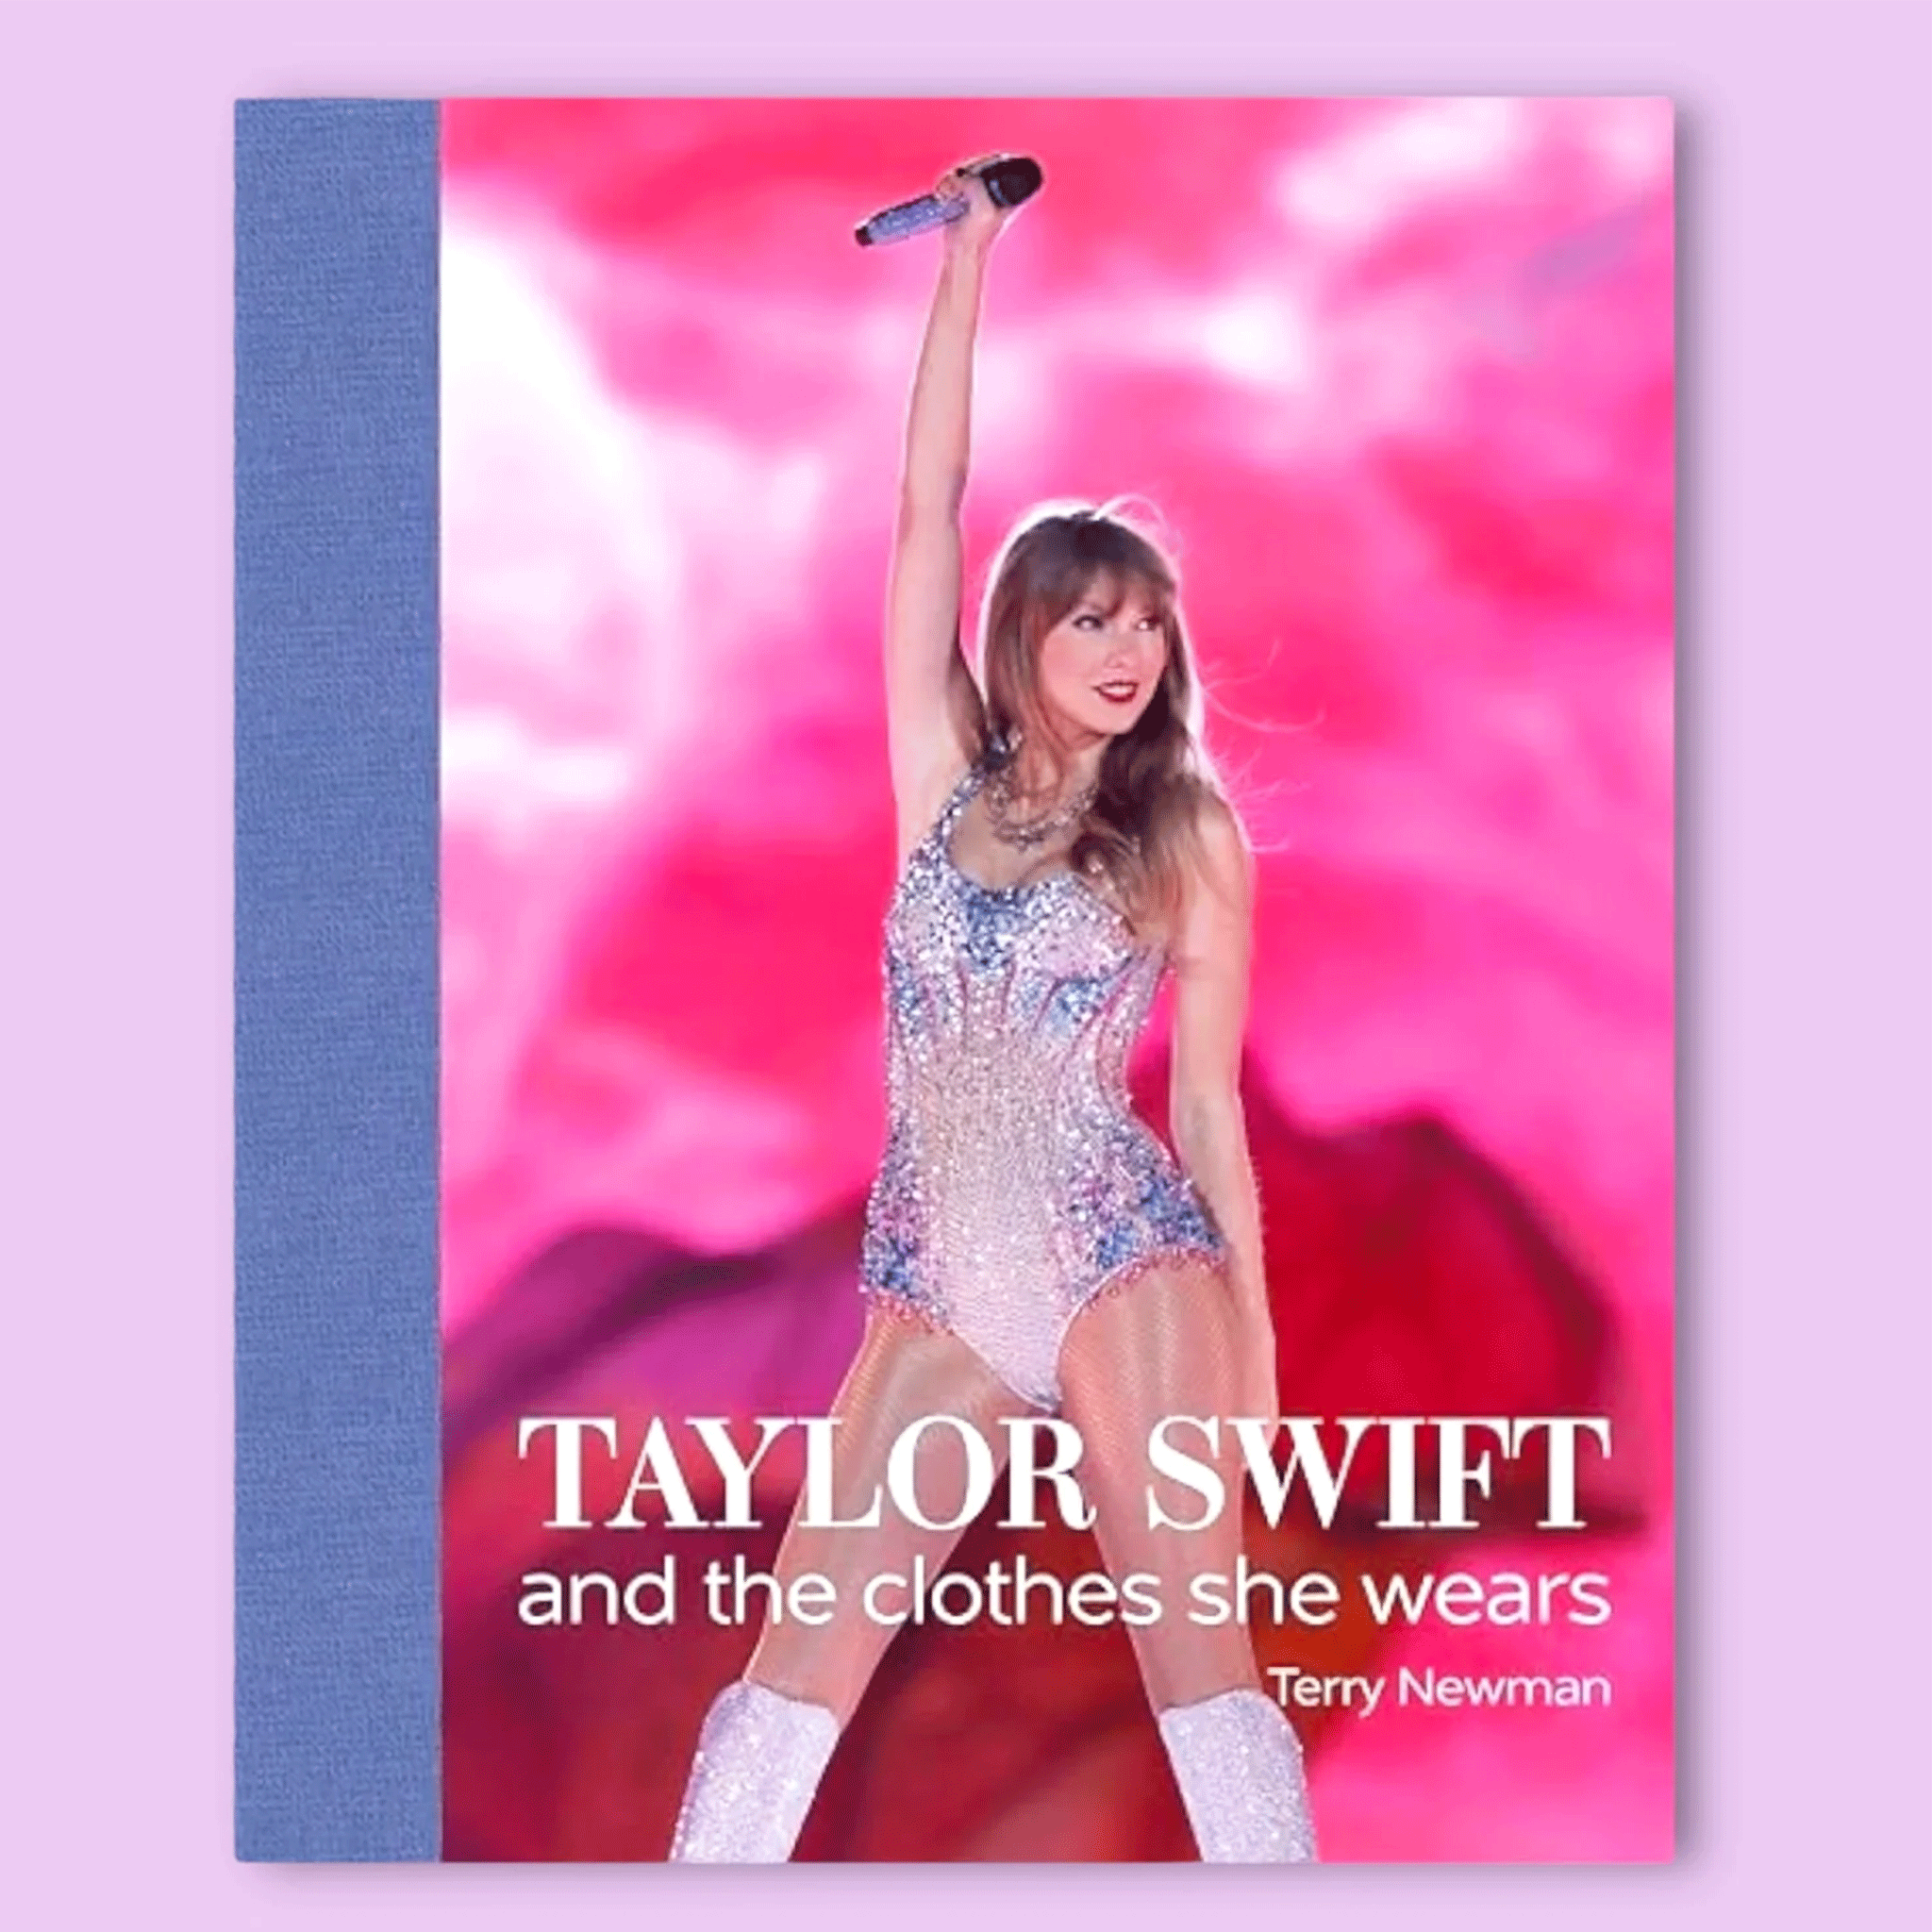 On a purple background is a hot pink book cover with a photo of Taylor Swift in her sparkle stage outfit along with text along the bottom half that reads, "Taylor Swift and the clothes she wears".  